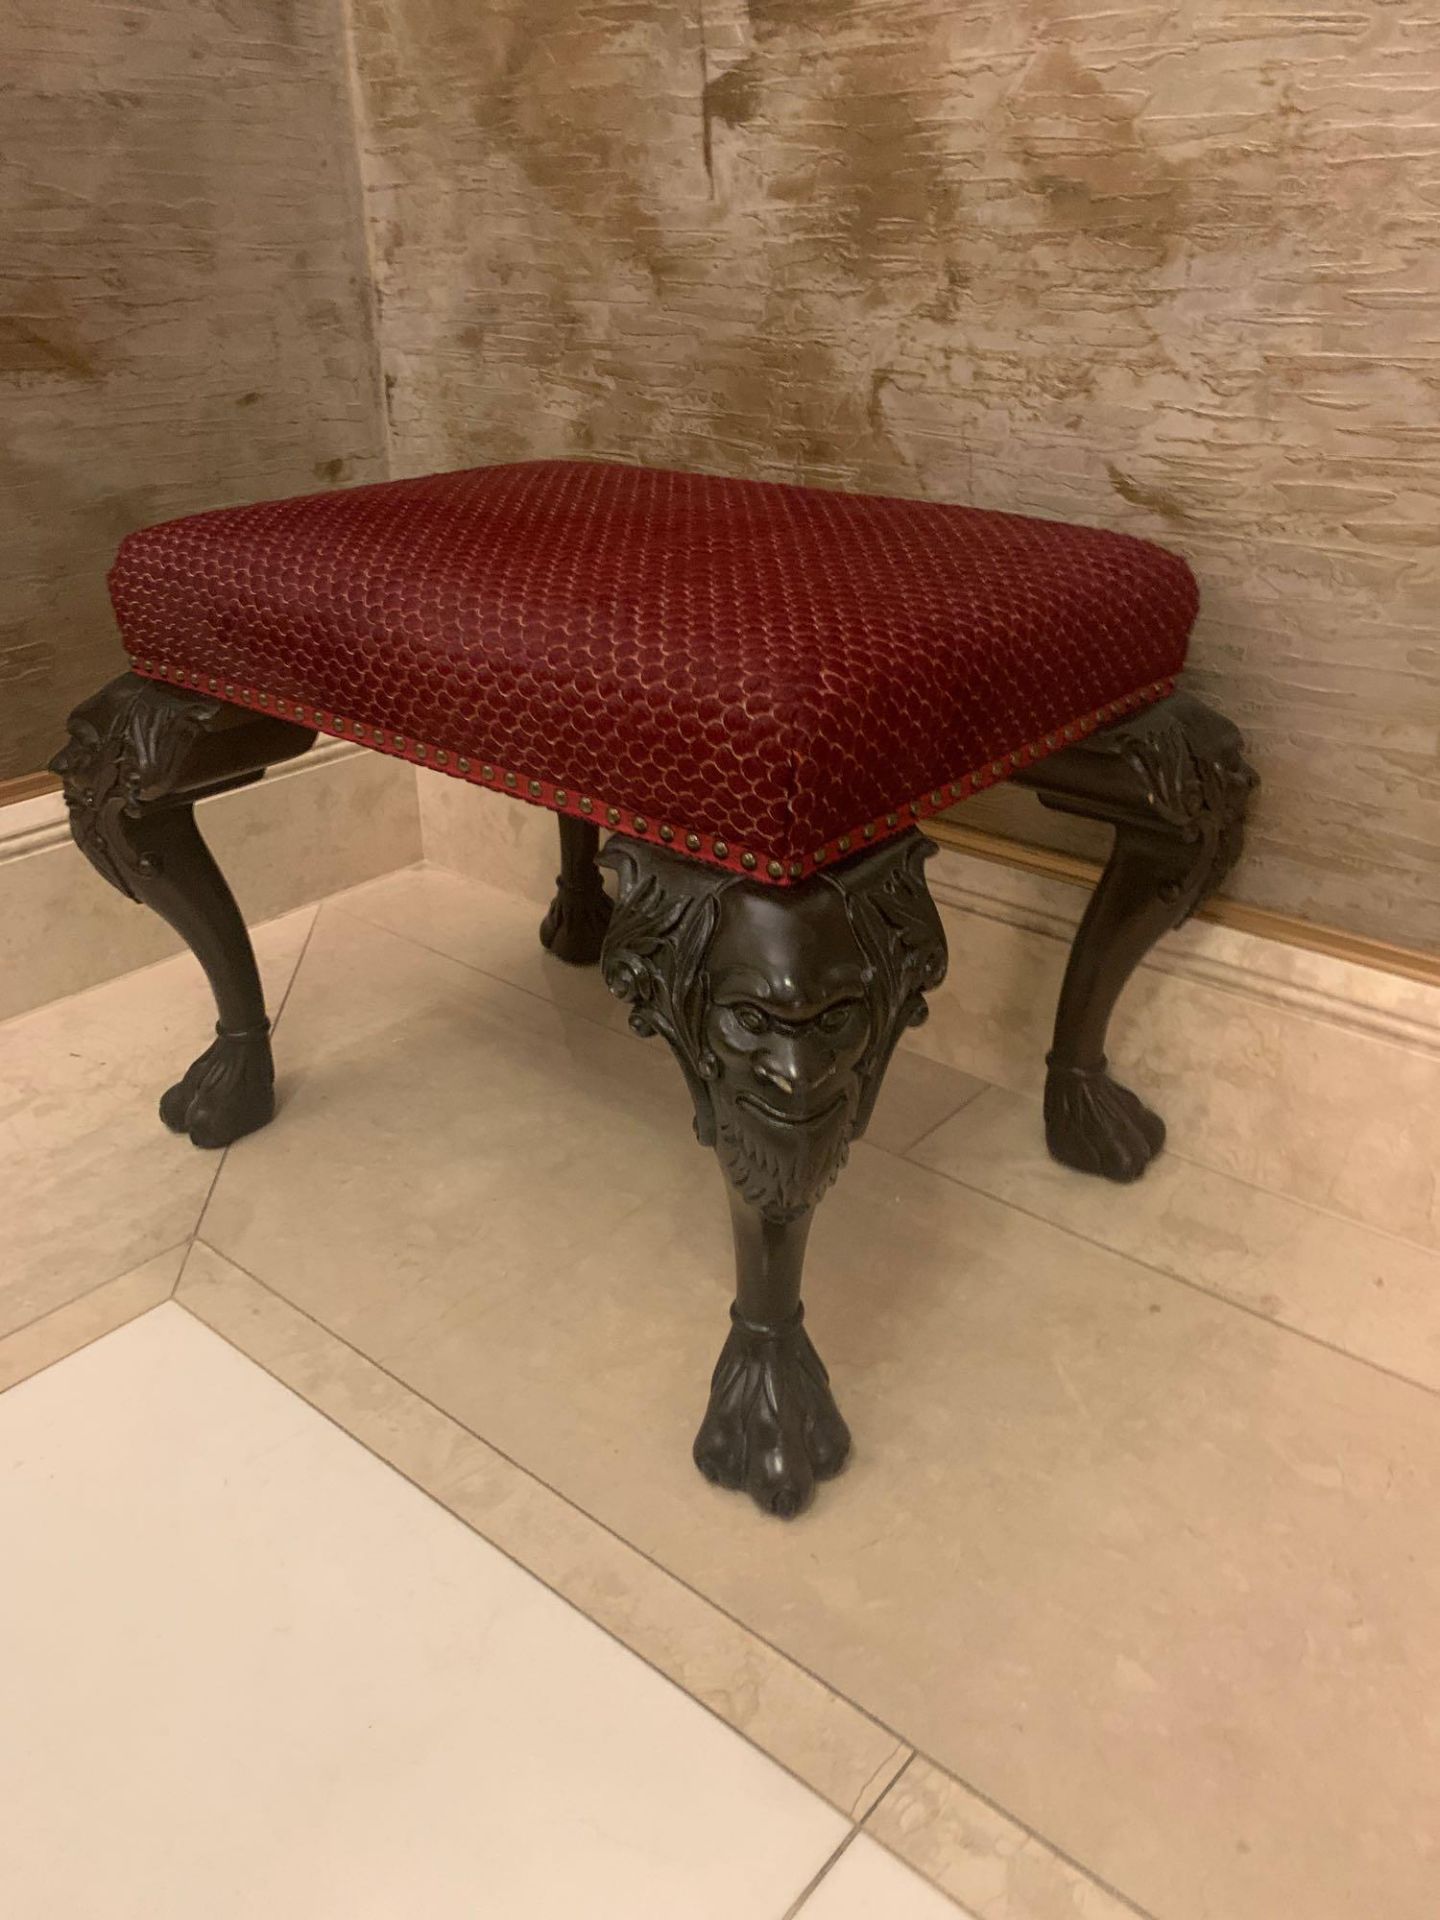 Hall Bench Upholstered Red Seat Pad With Nail Head Trim On Mask Knuckle Cabriole Legs Terminating In - Image 2 of 3